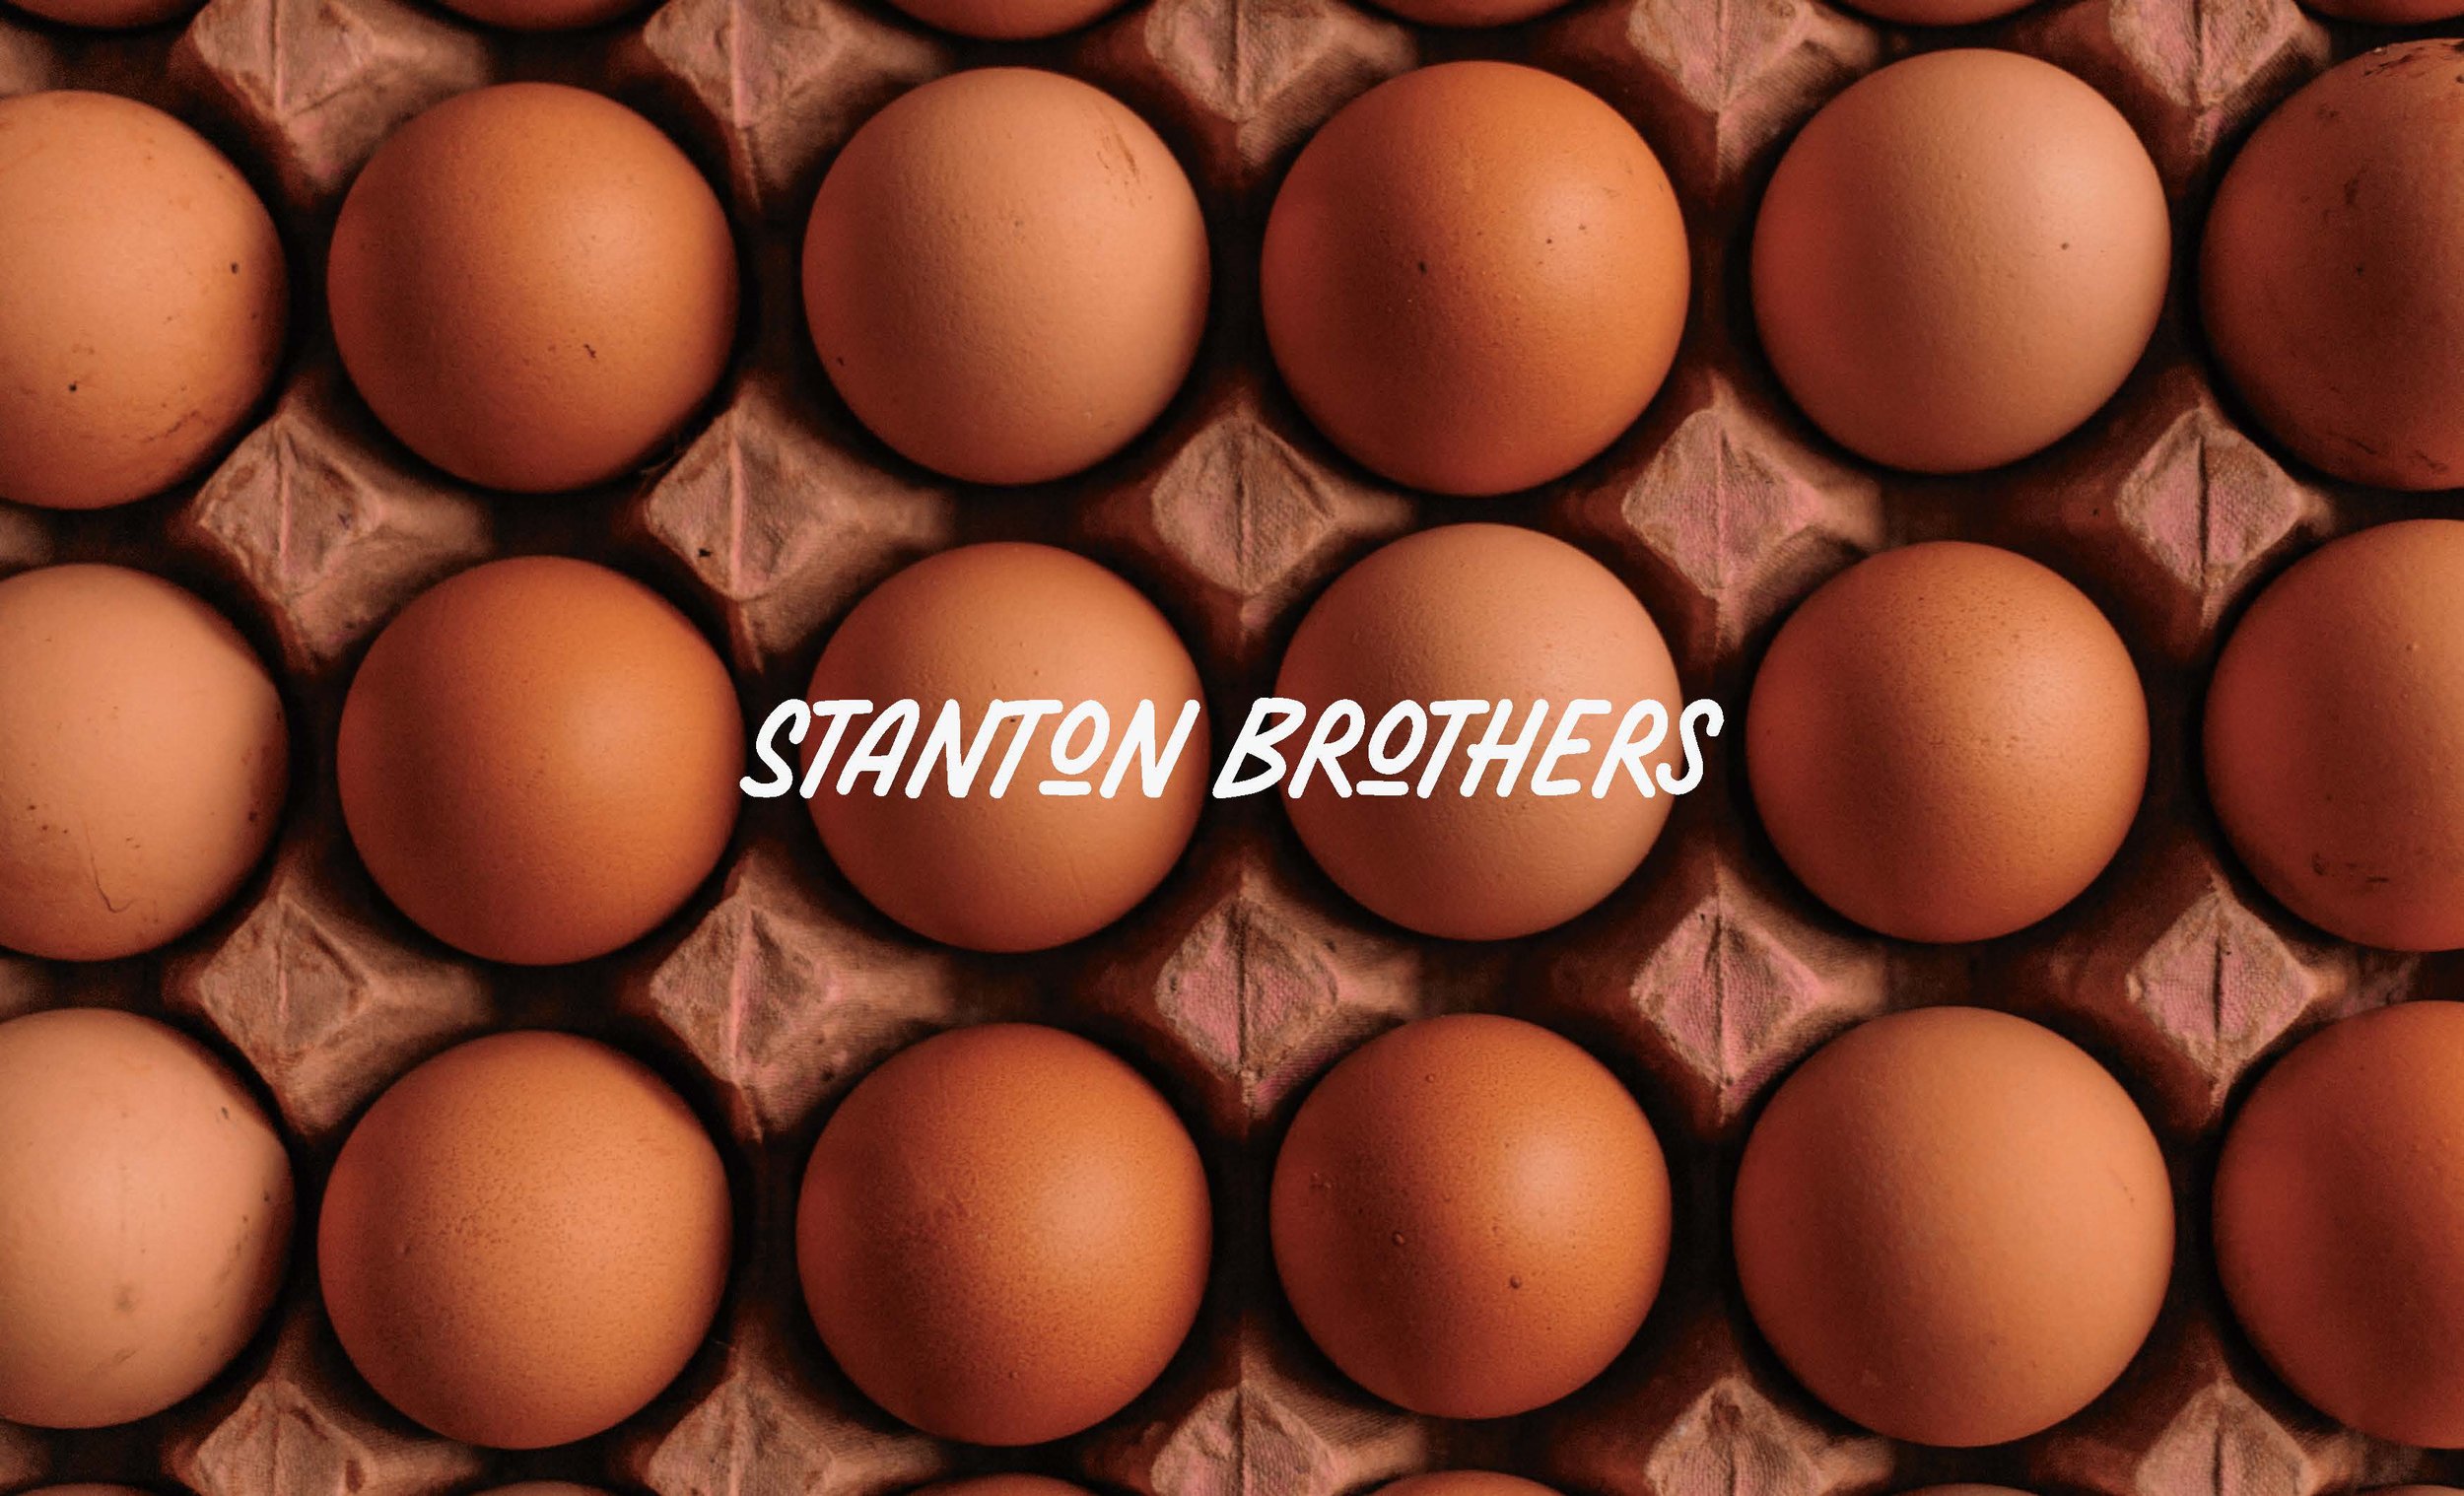  Stanton Brothers farmers’ market vendor logo name overlayed on photo of eggs. 